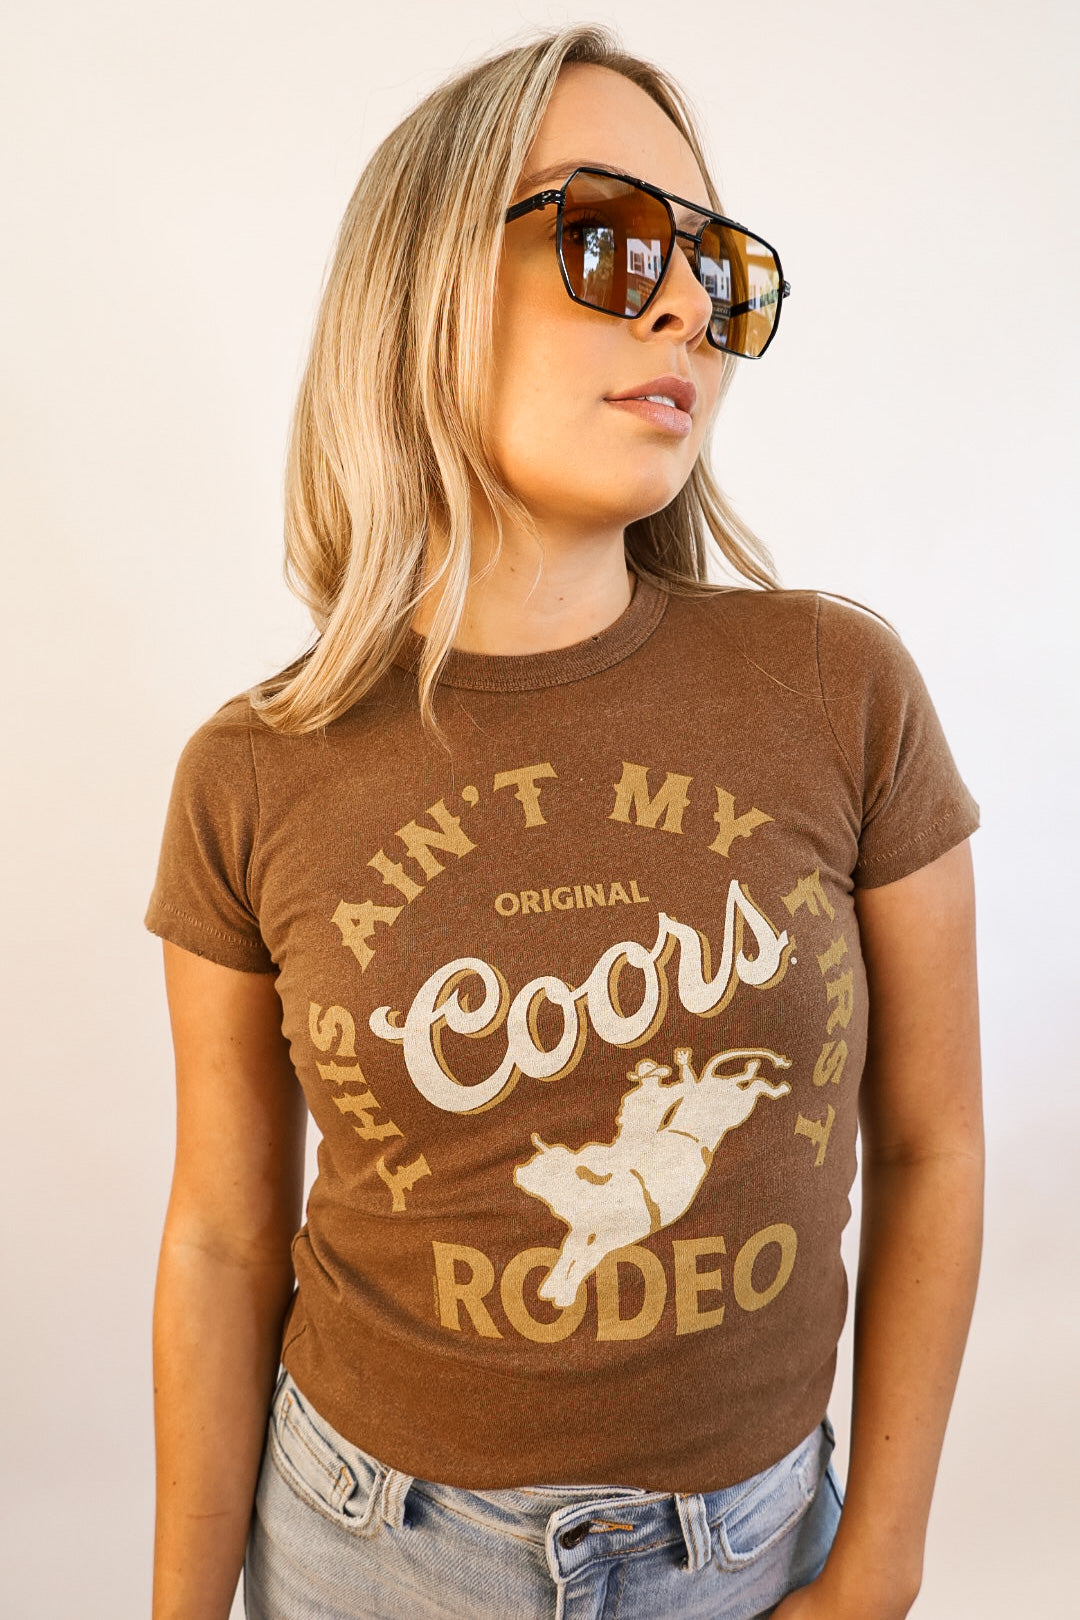 Coors Rodeo Baby Tee